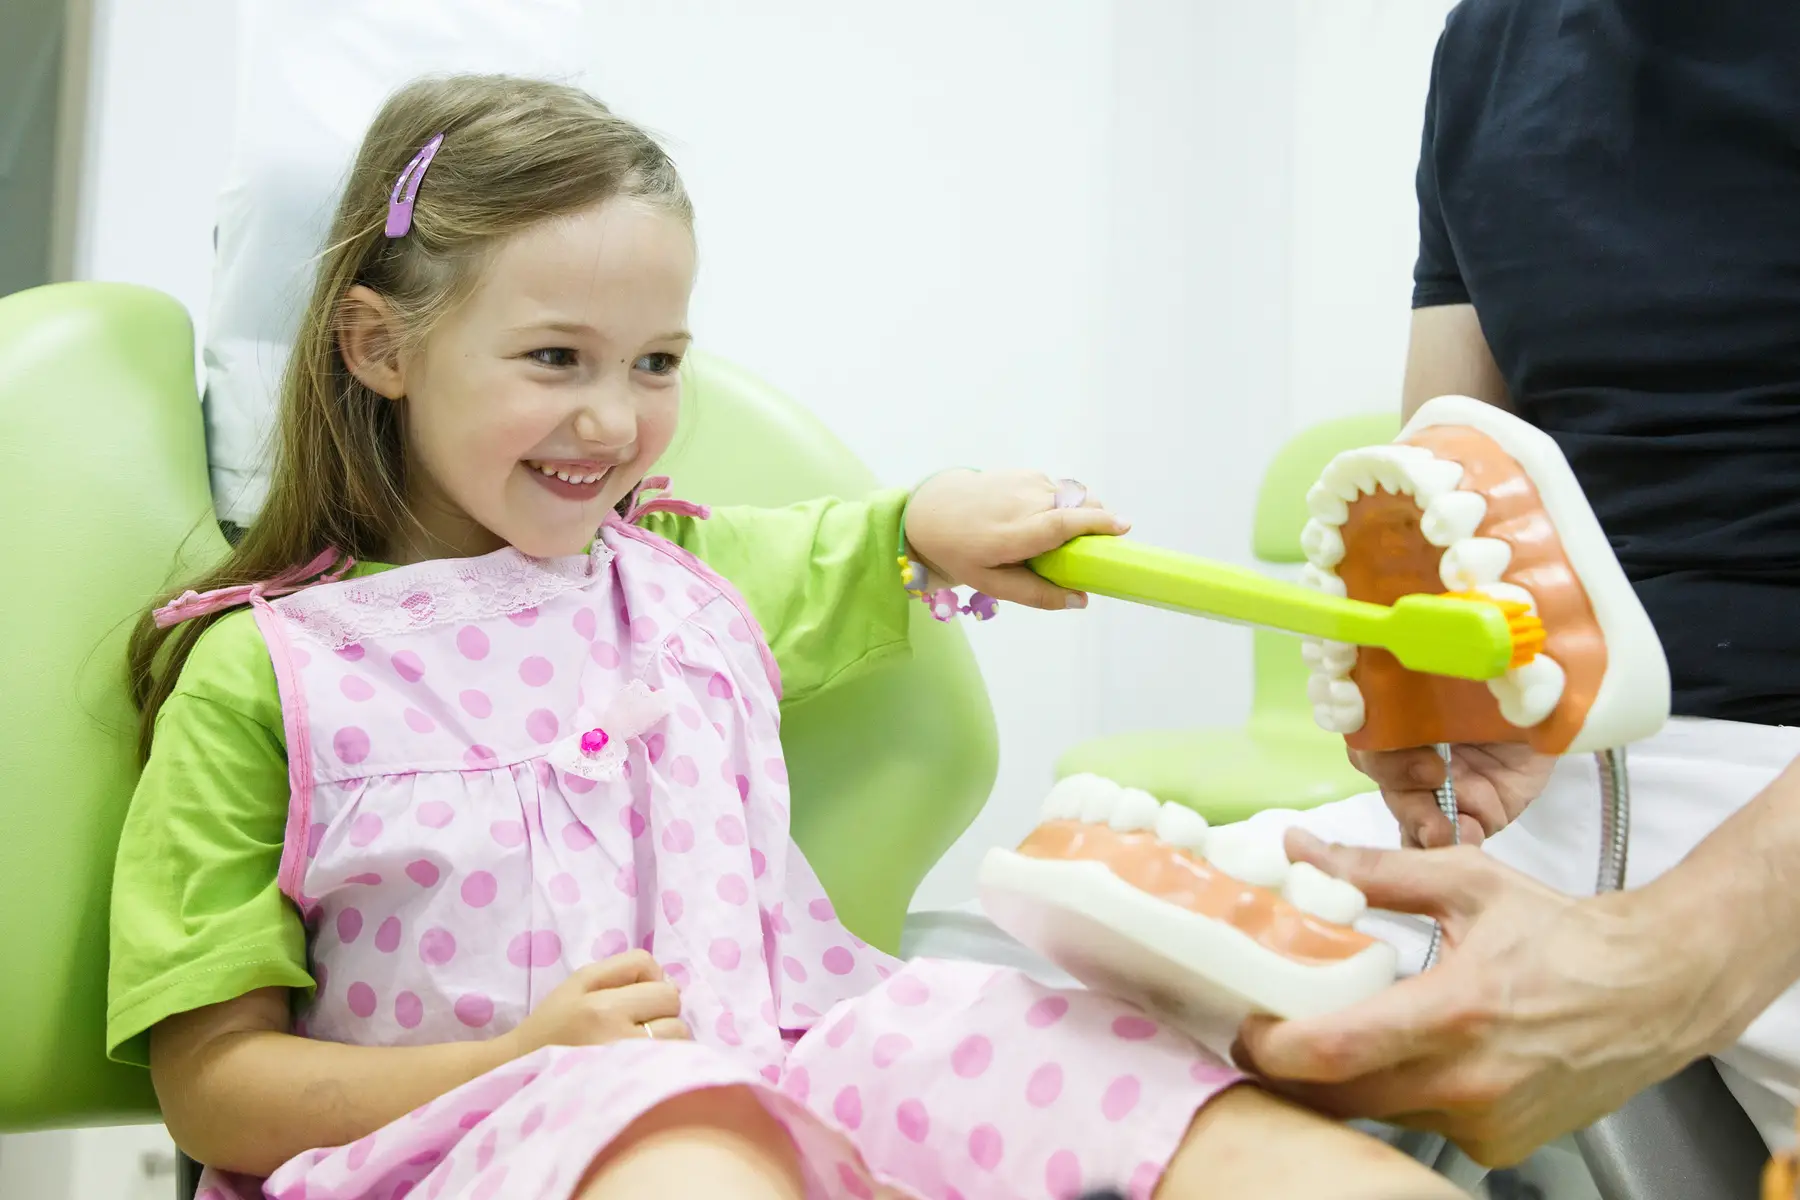 a little girl visiting the dentist and brushing a giant model of teeth